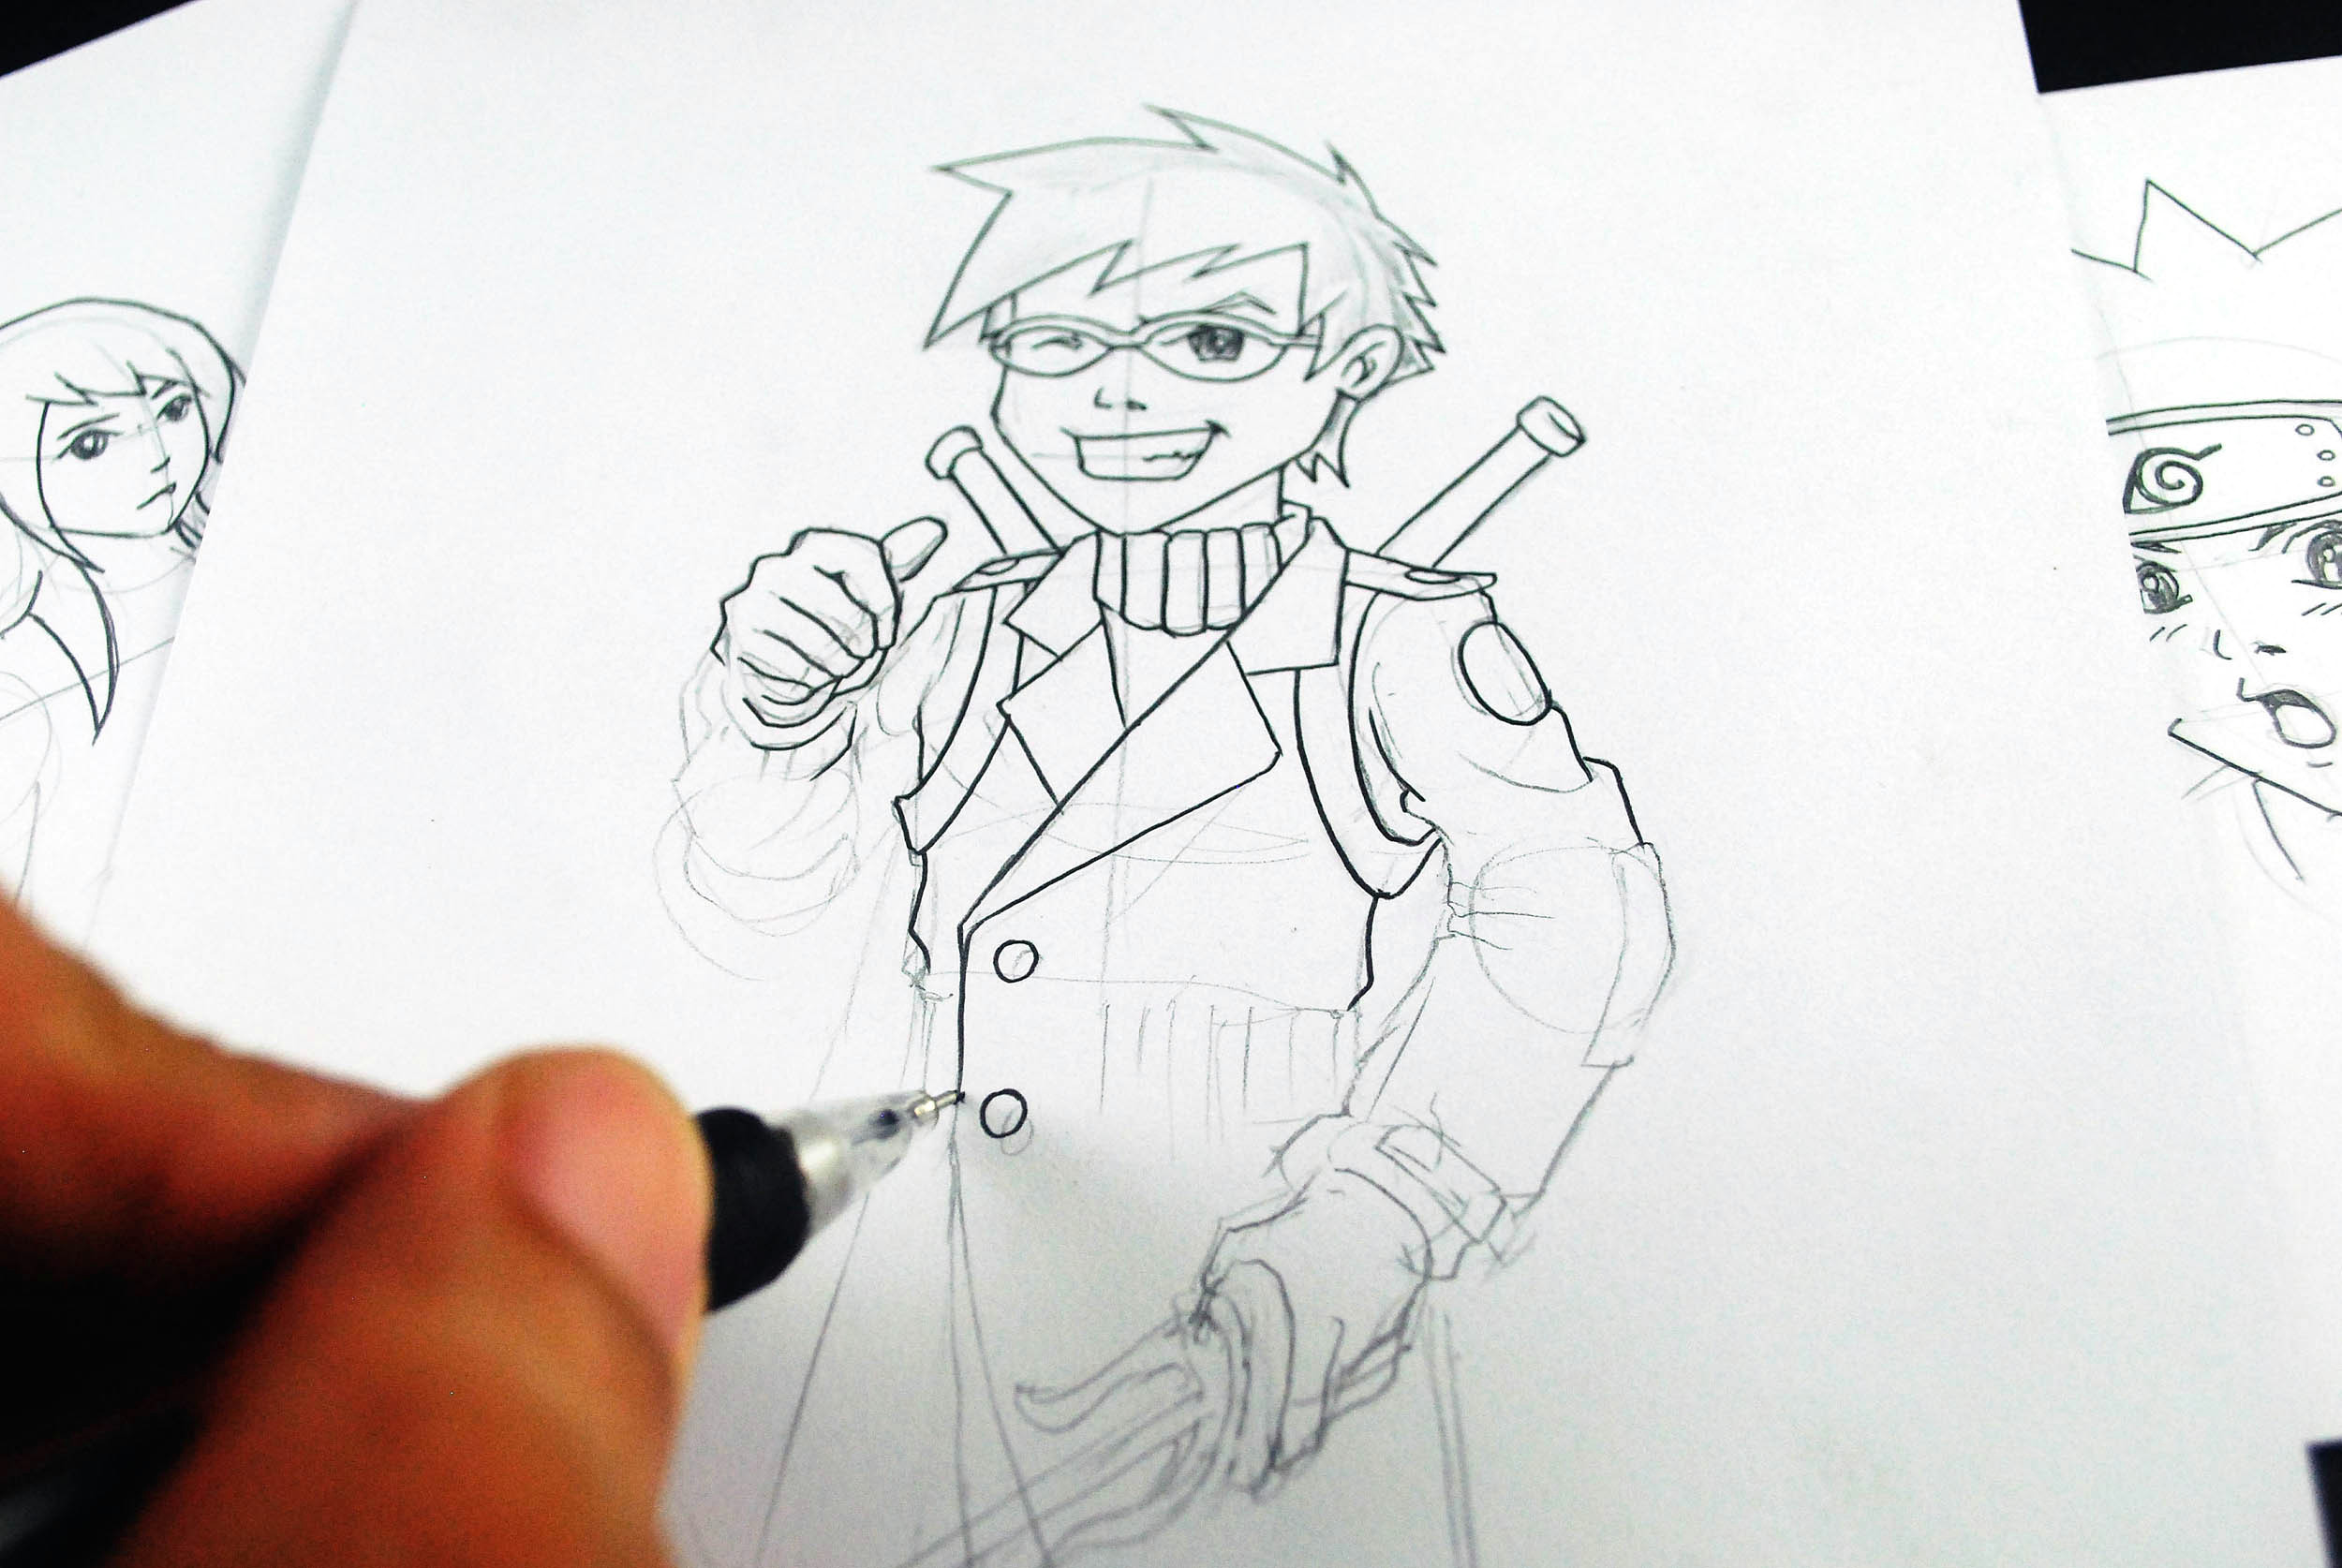 Drawing Anime In Steps How to Learn to Draw Manga and Develop Your Own Style 5 Steps